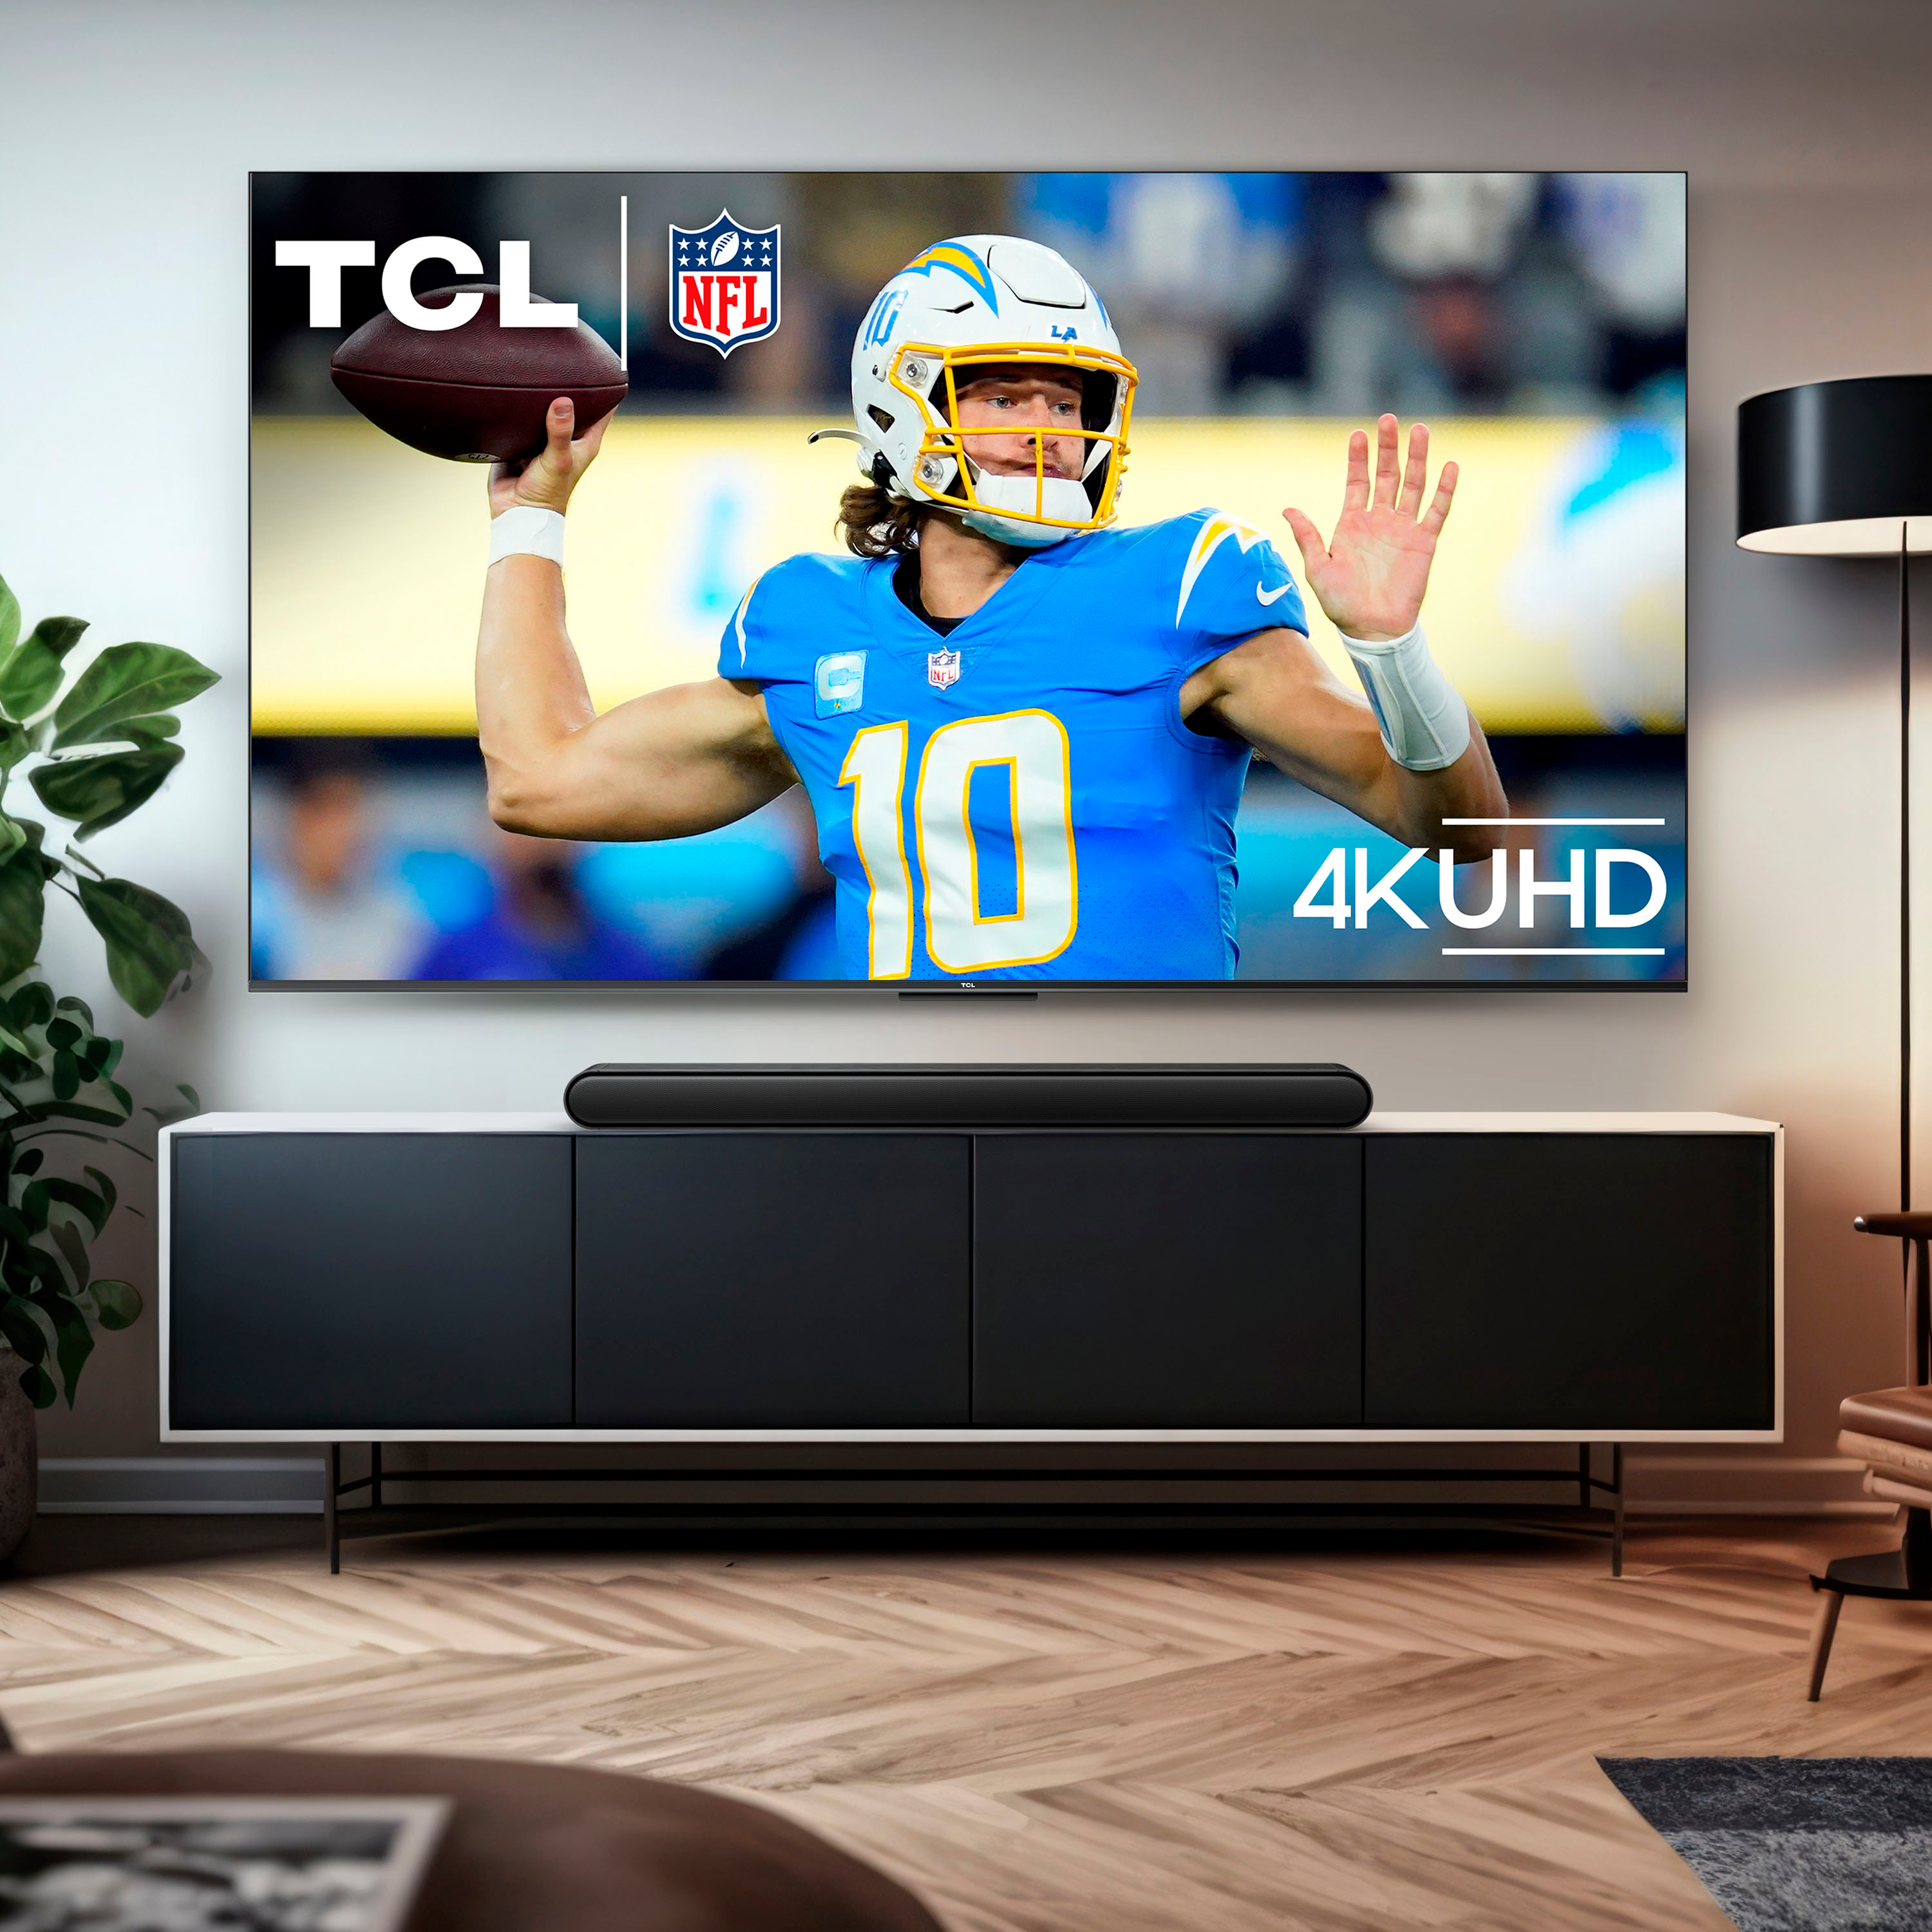 Tv 75 Pulgadas TCL Smart TV 4K/Ultra HD 75A445 con Android TV LED